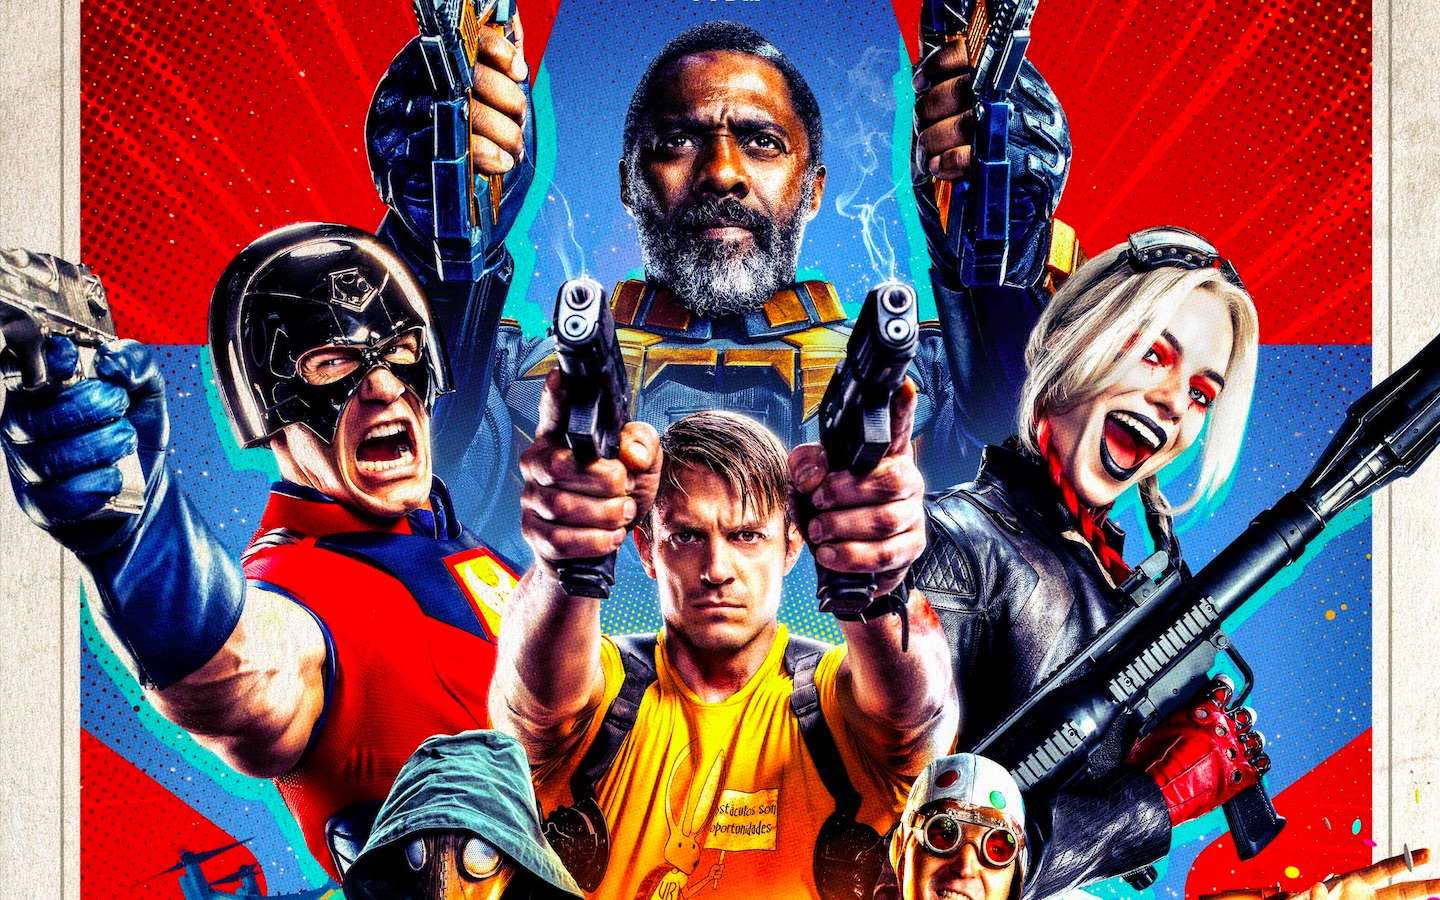 Suicide Squad viewers are shocked by the DC film's rating of age